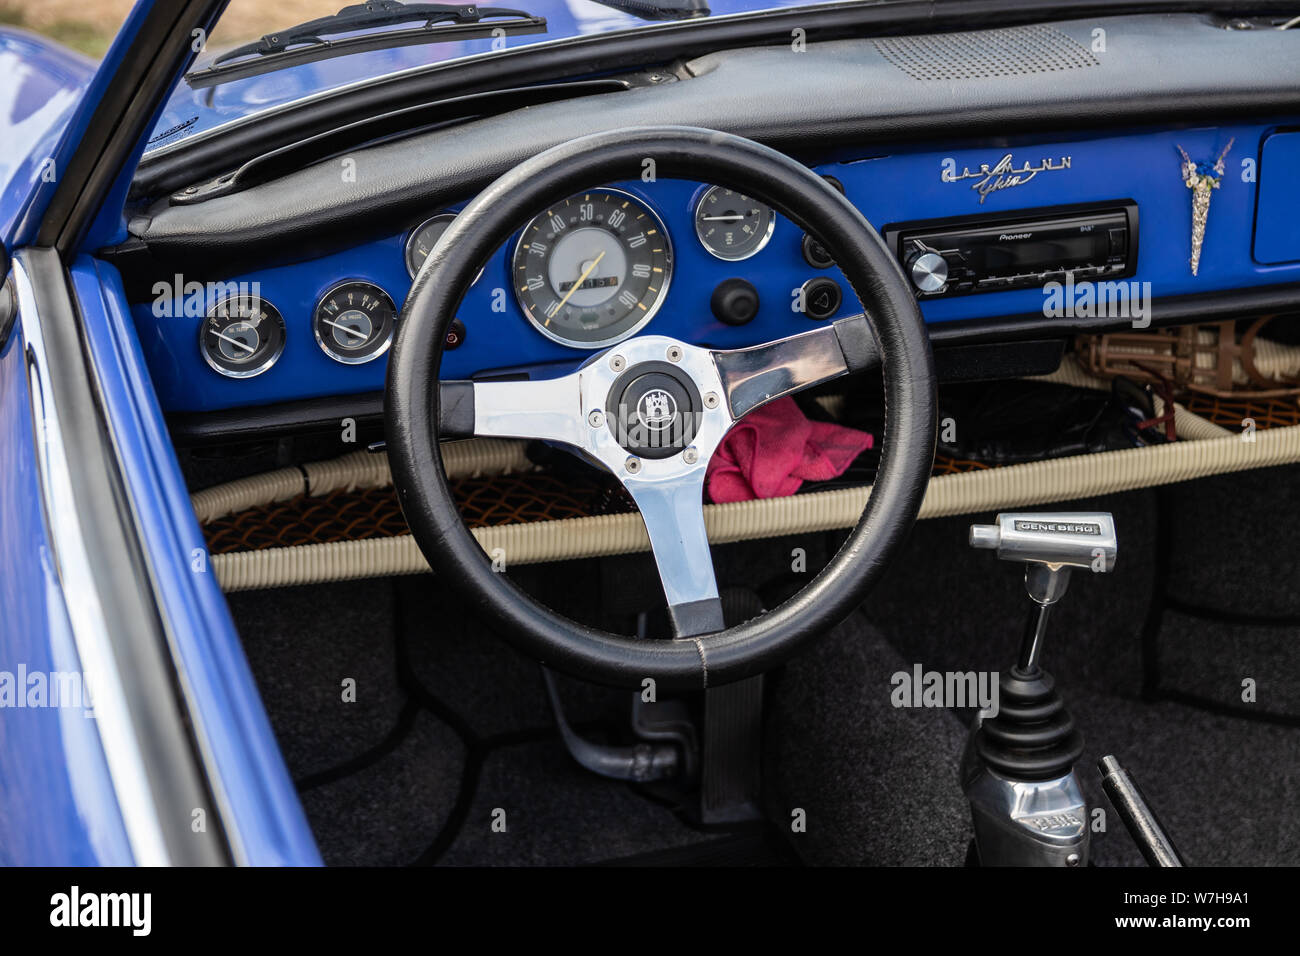 the interior of a vintage car showing the steering wheel and dashboard plus speedometer Stock Photo